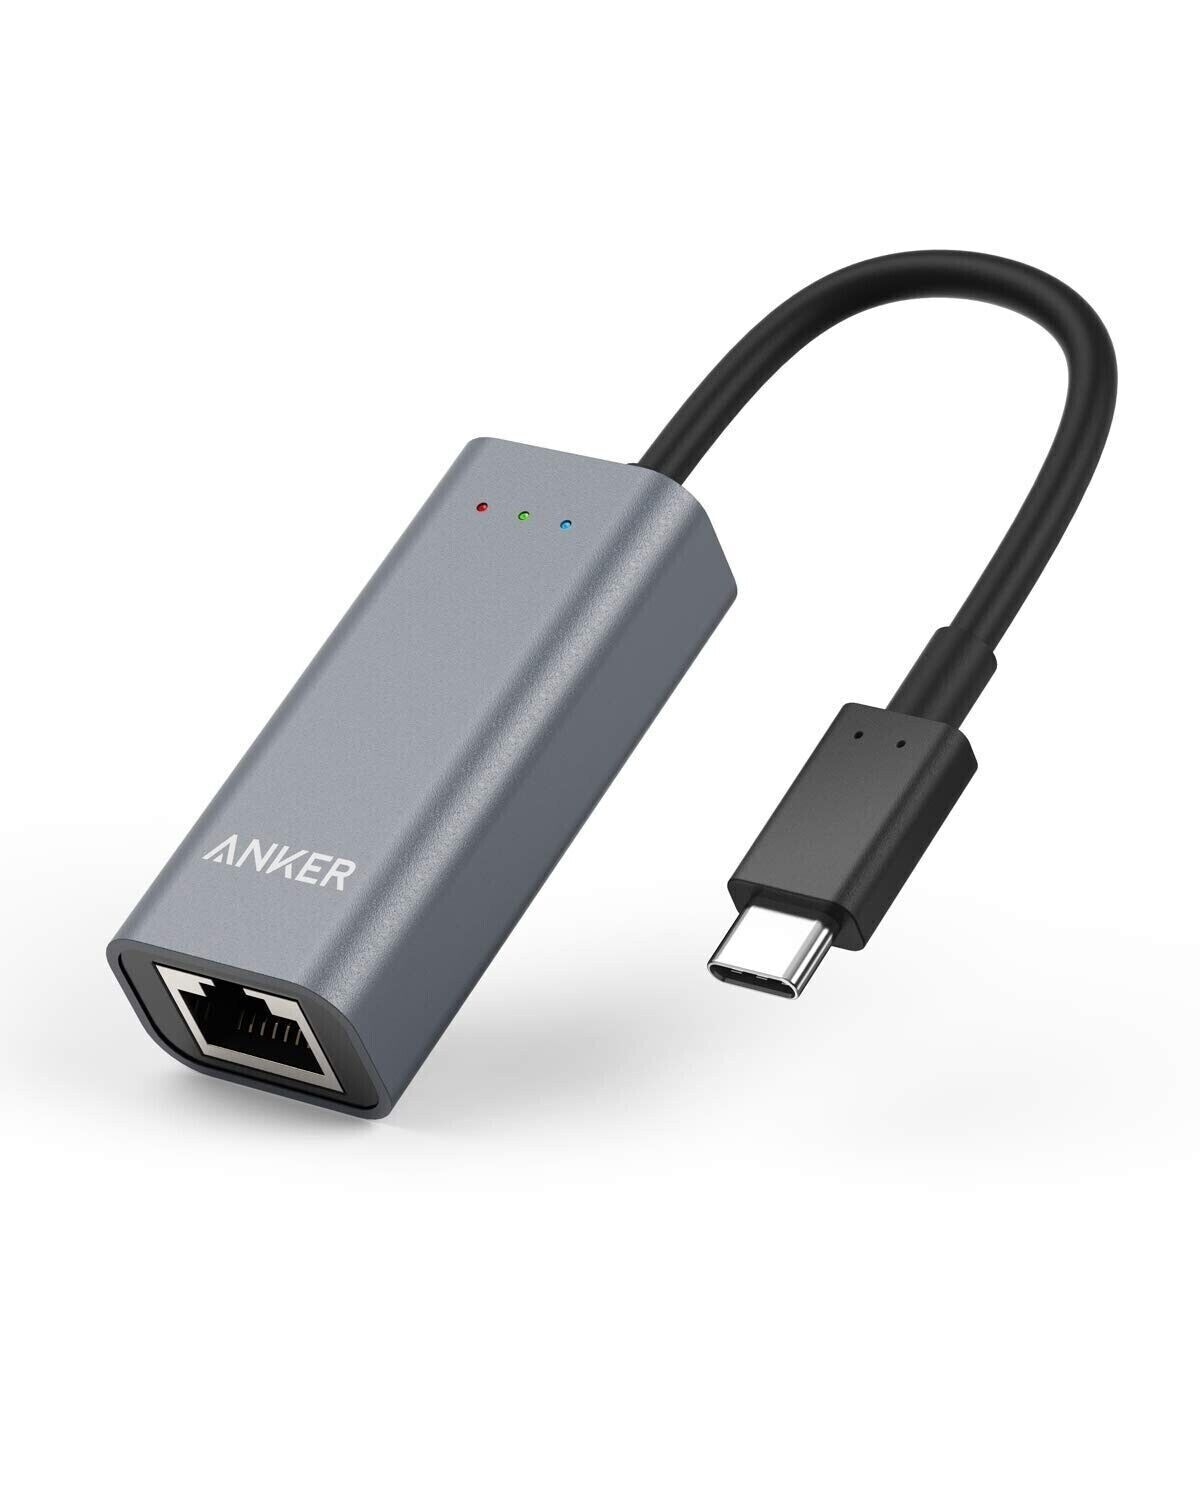 NEW ANKER USB-C to Ethernet Adapter USB-C Hub - Grey - A8313